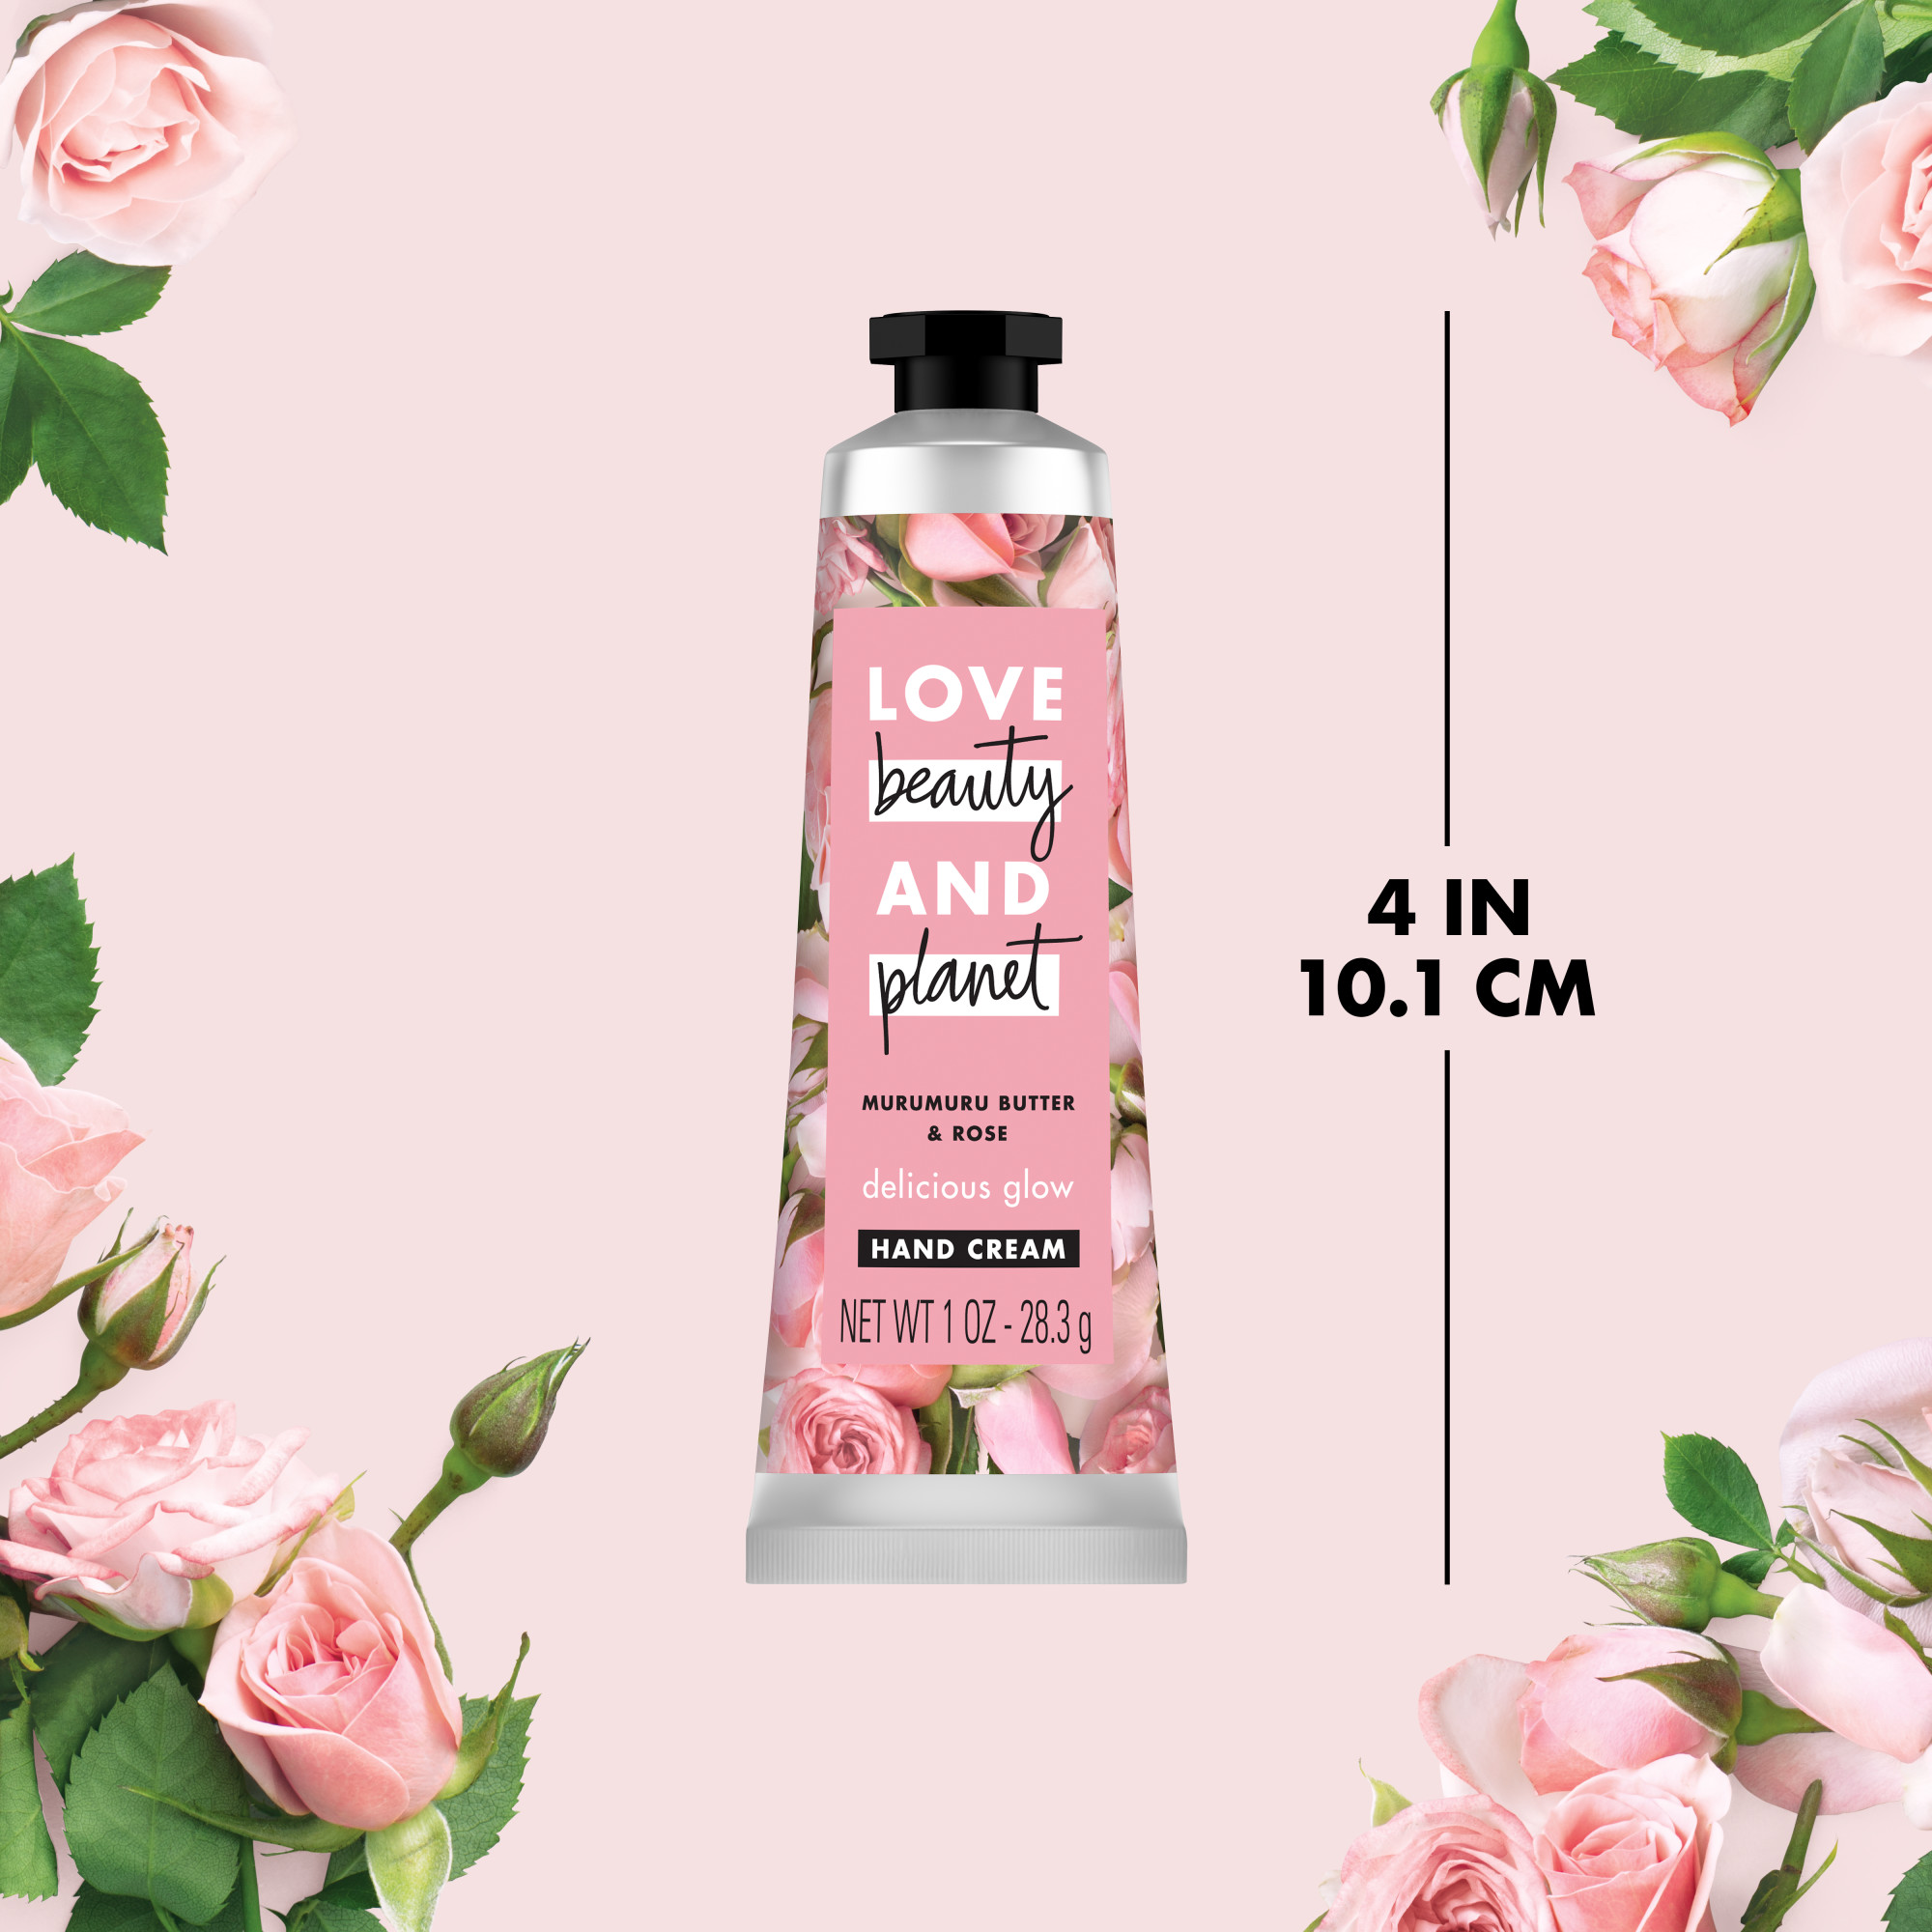 Love Beauty And Planet Murumuru Butter & Rose Hand Cream Delicious Glow 1 oz - image 5 of 9